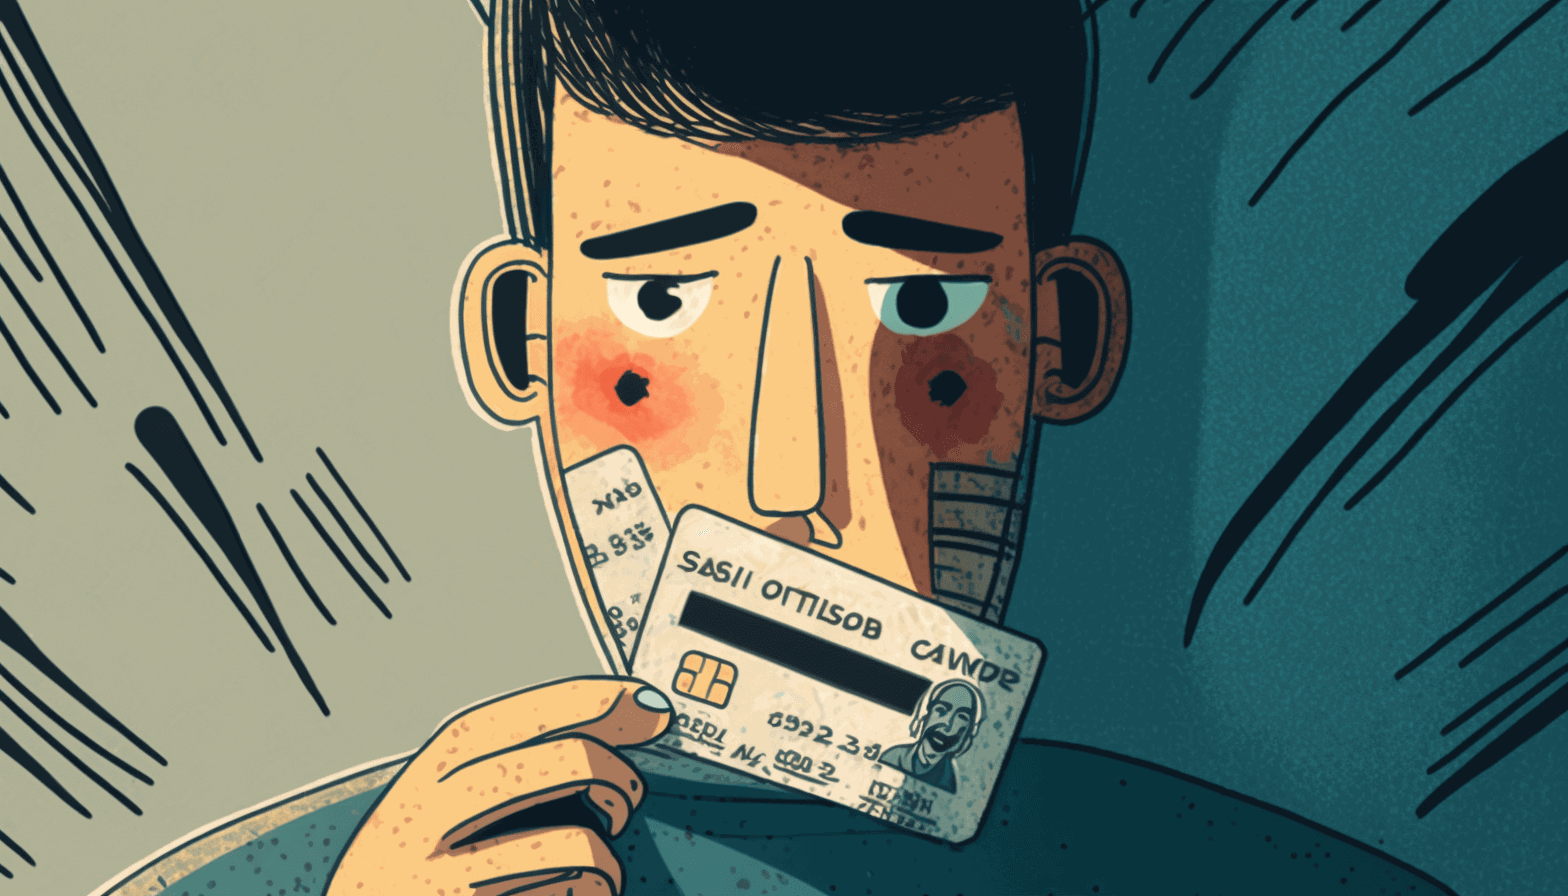 A person holding a credit card in one hand and a lock in the other hand, with a concerned look on their face, as if they are worried about the safety of their personal information.